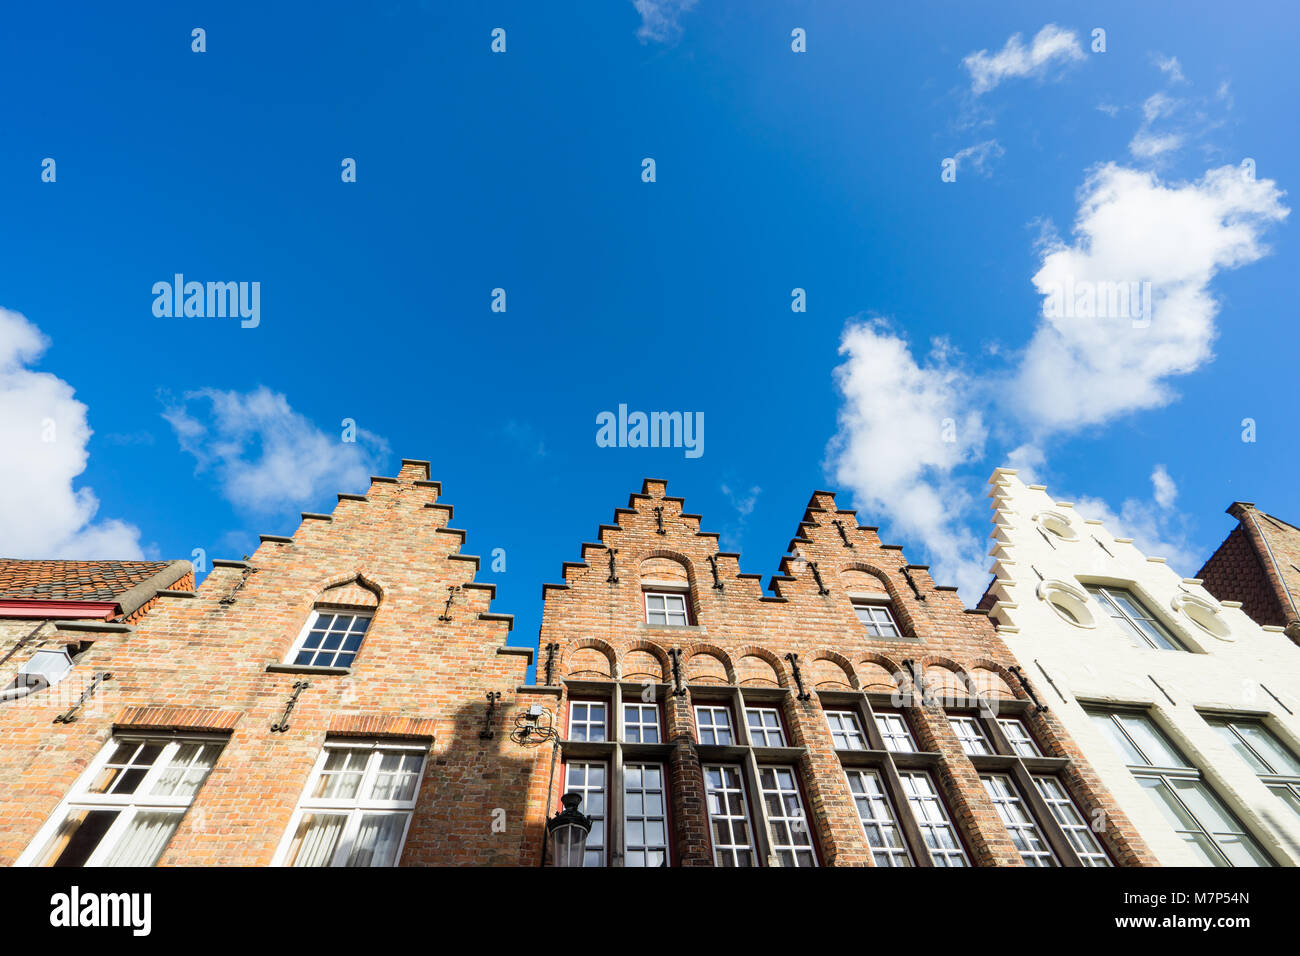 Stepped Gable Houses in Blue Sky Stock Photo